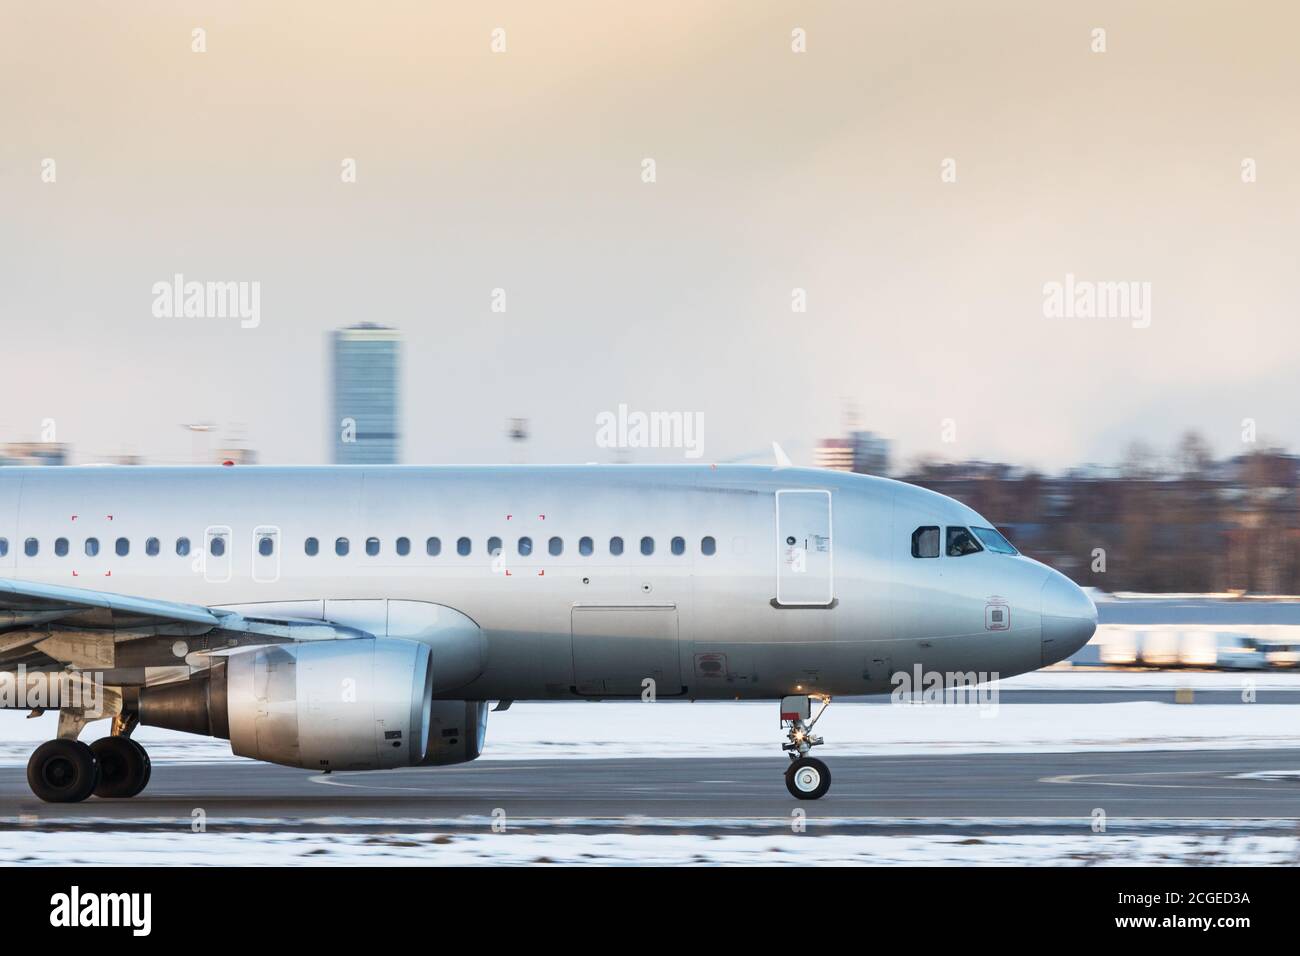 Silver passenger airplane taxiing on runway to take off in winter day, side view. Aviation, transportation, travel Stock Photo